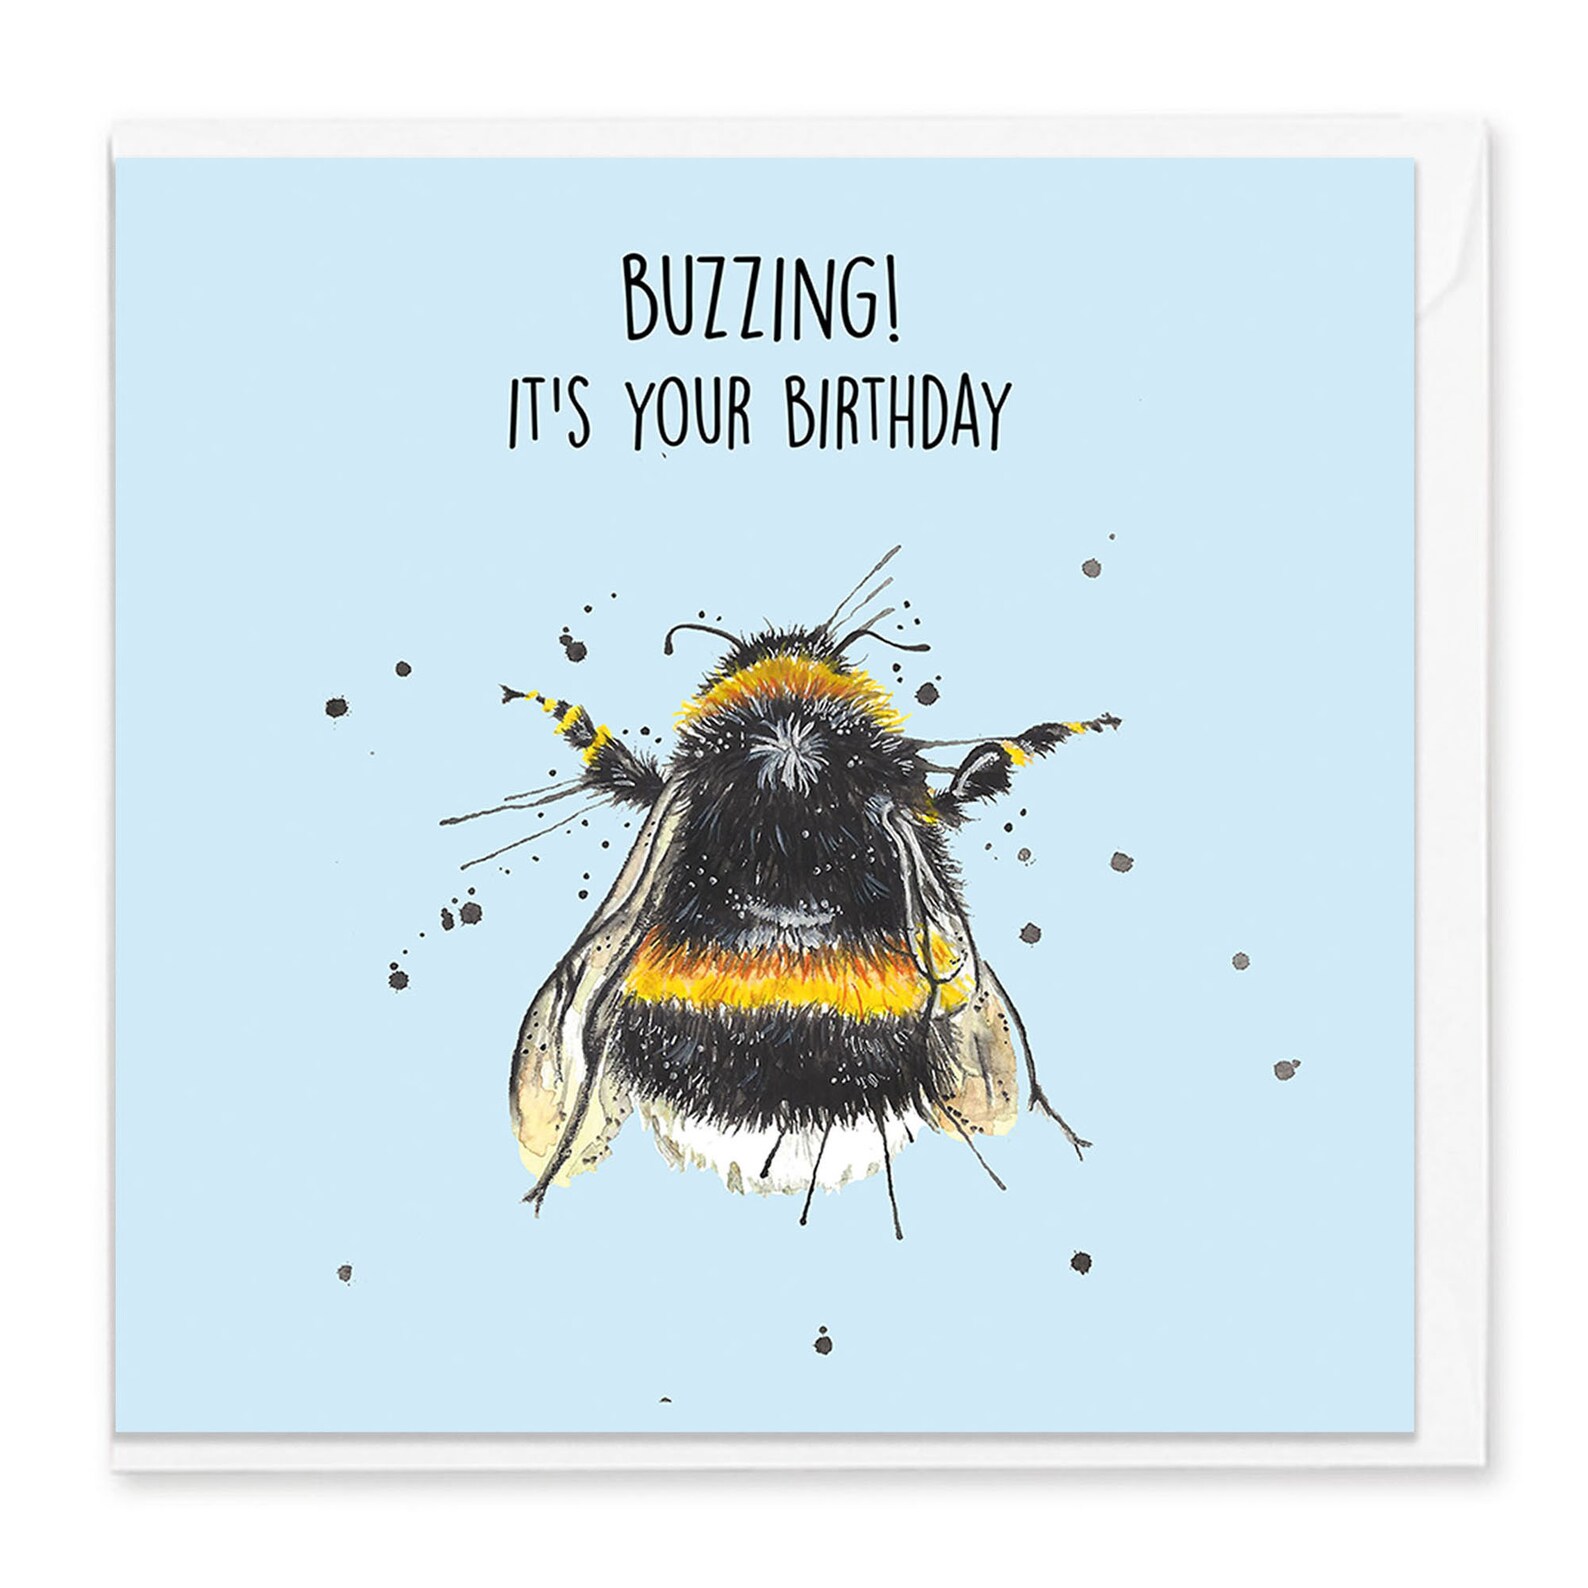 Buzzing It's Your Birthday Card Greeting Card Bee Card - Etsy